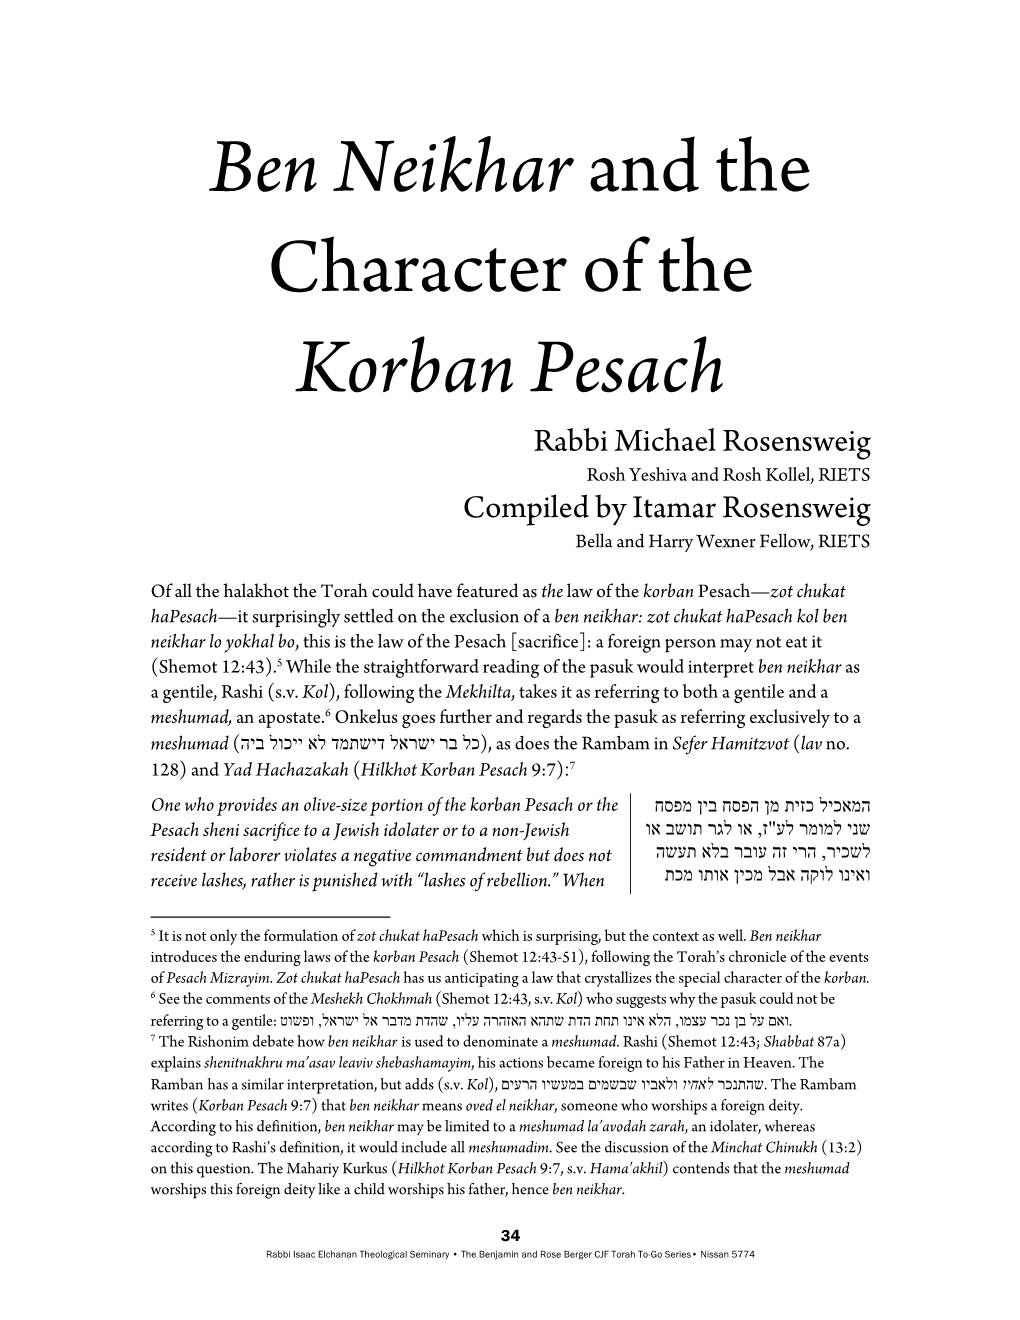 Korban Pesach Rabbi Michael Rosensweig Rosh Yeshiva and Rosh Kollel, RIETS Compiled by Itamar Rosensweig Bella and Harry Wexner Fellow, RIETS